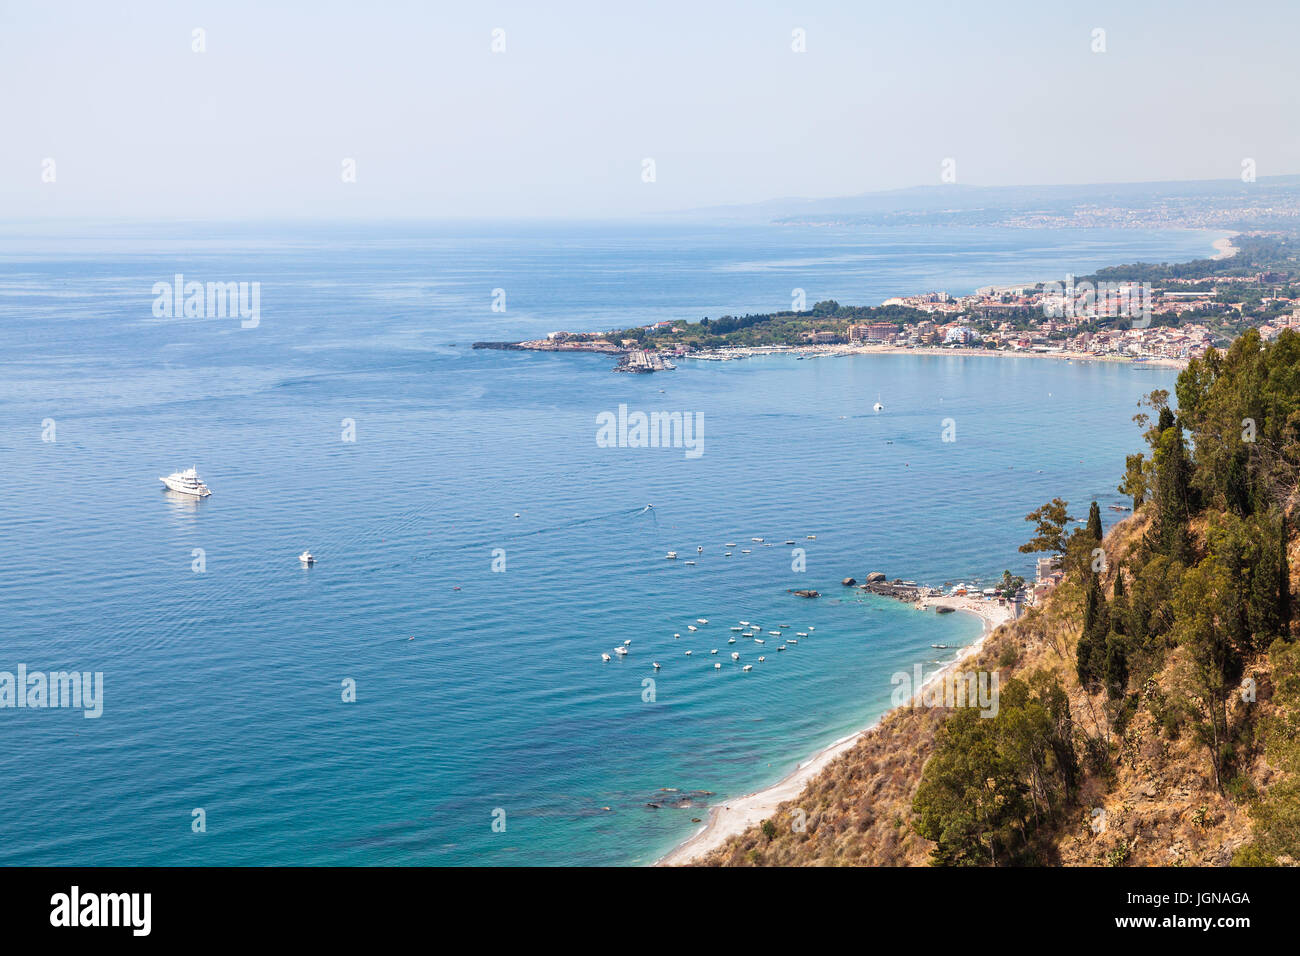 travel to Sicily, Italy - view of Giardini Naxos town on coast of Ionic sea from Belvedere viewpoint at Piazza 9 Aprile in Taormina city Stock Photo